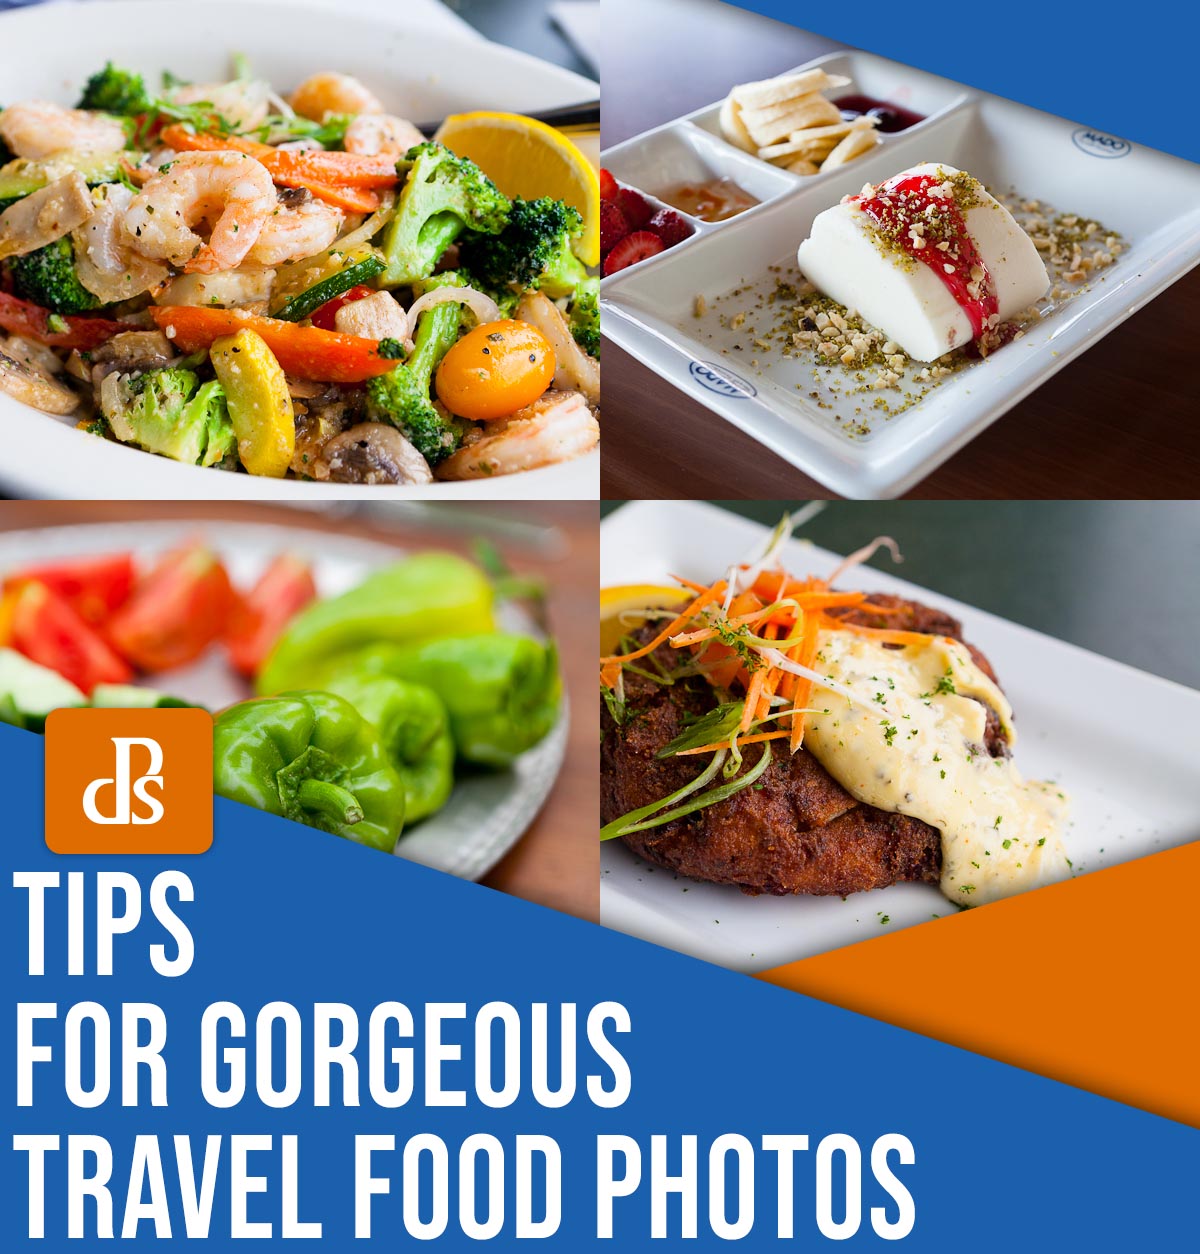 Tips for gorgeous travel food photos